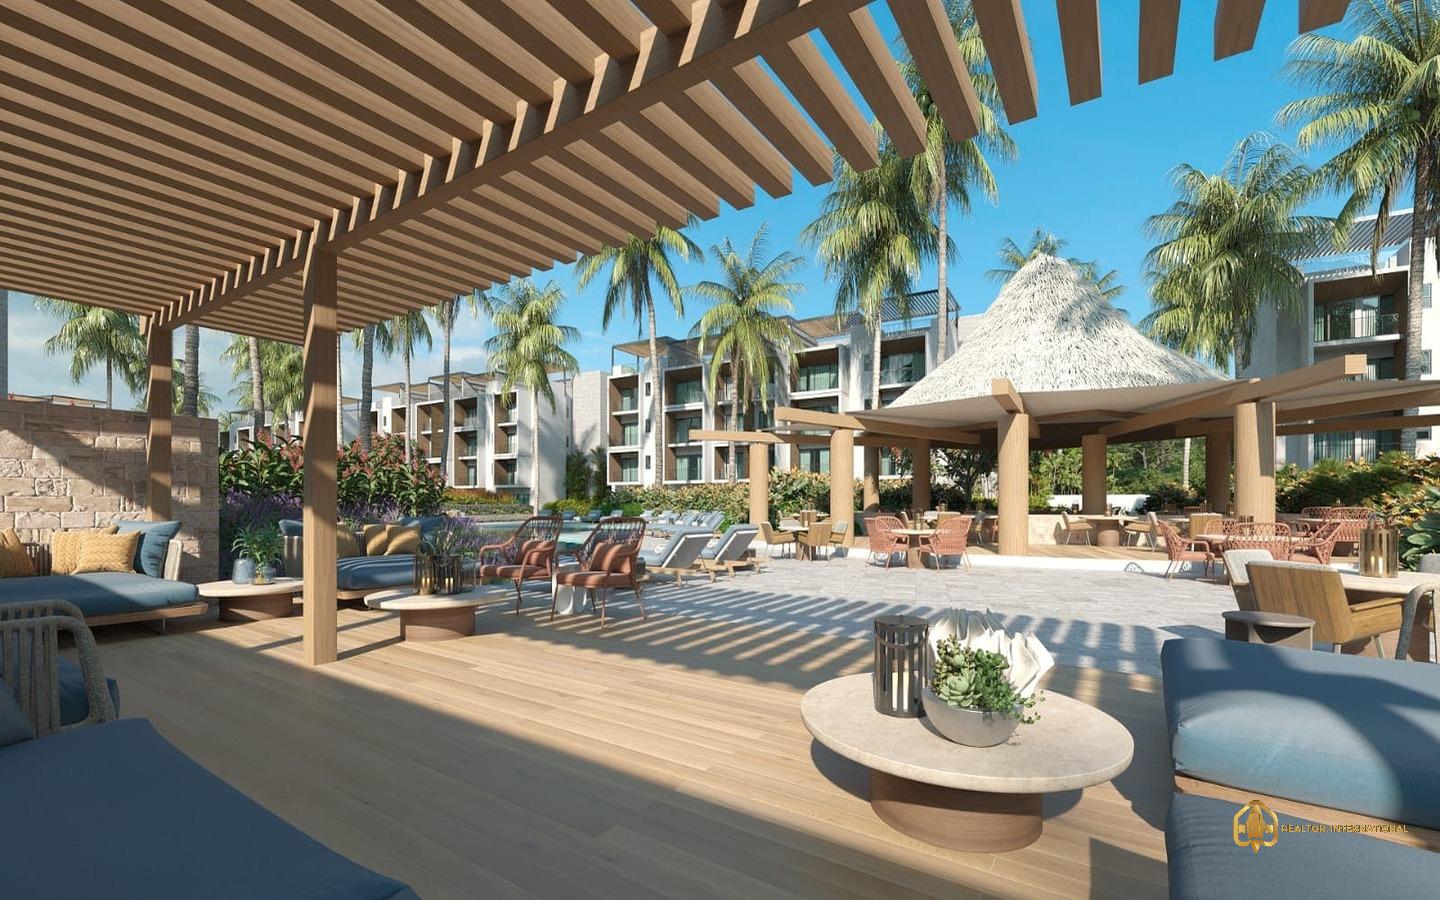 Punta Cana condos for sale in Dominican Republic one bedroom condo with full of amenities ()